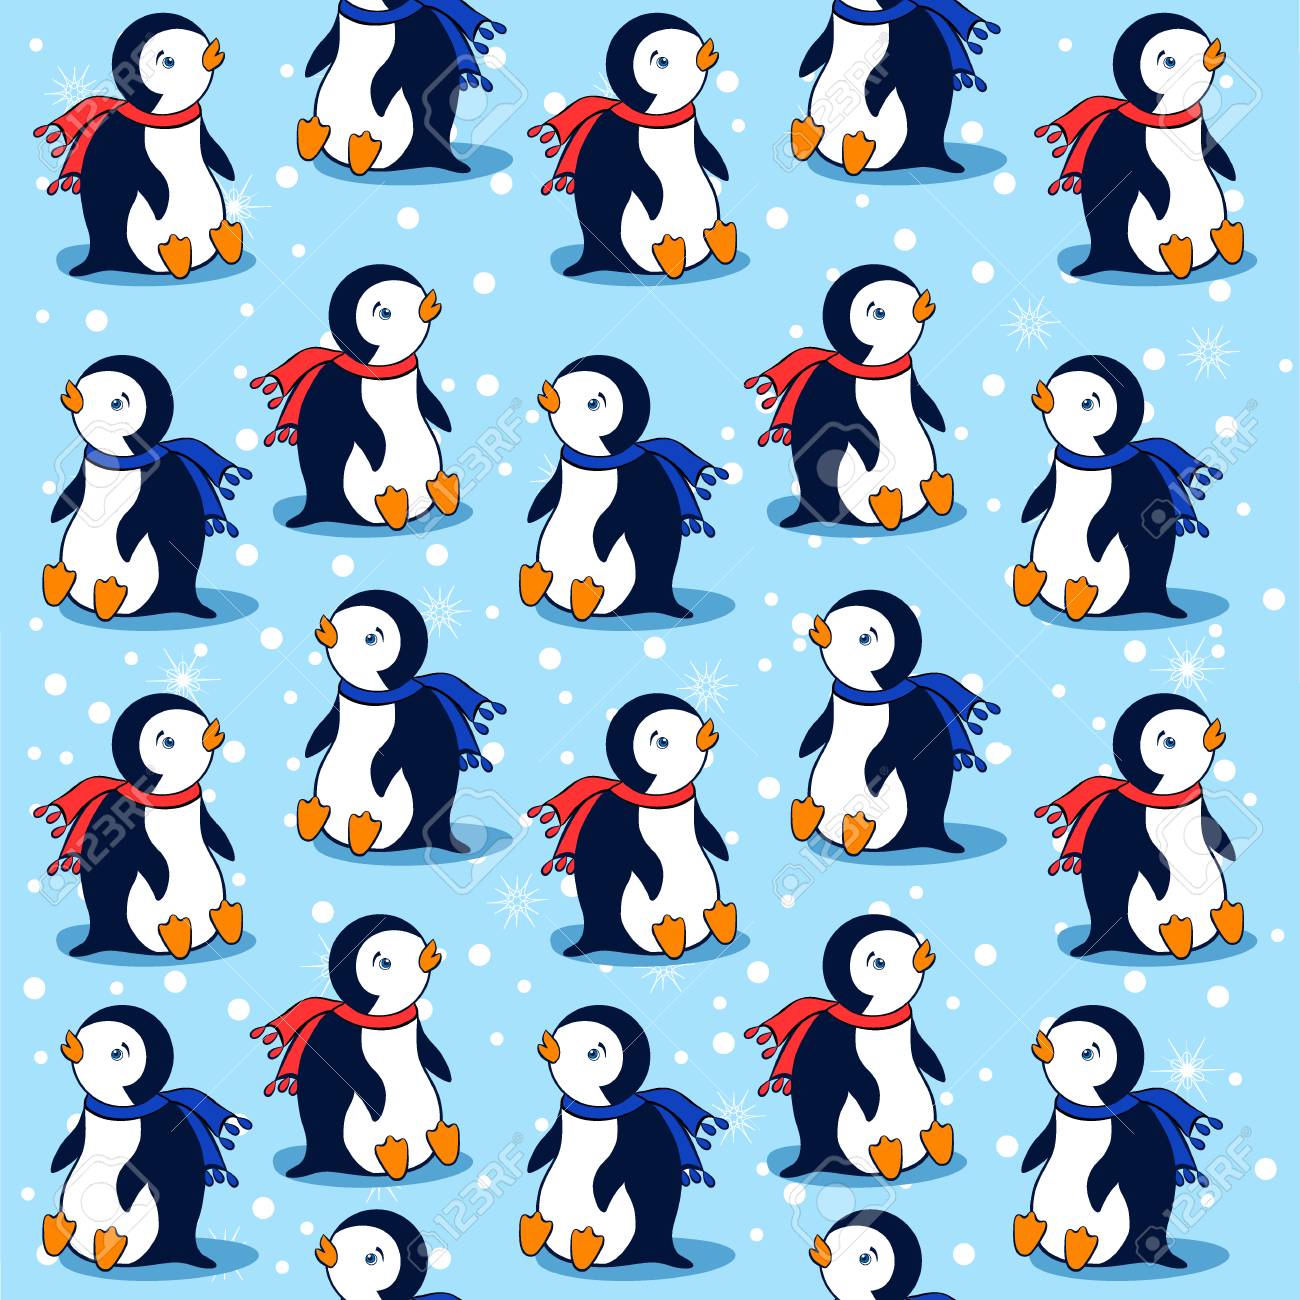 Cartoon Penguin On Blue Background With Snowflakes Vector